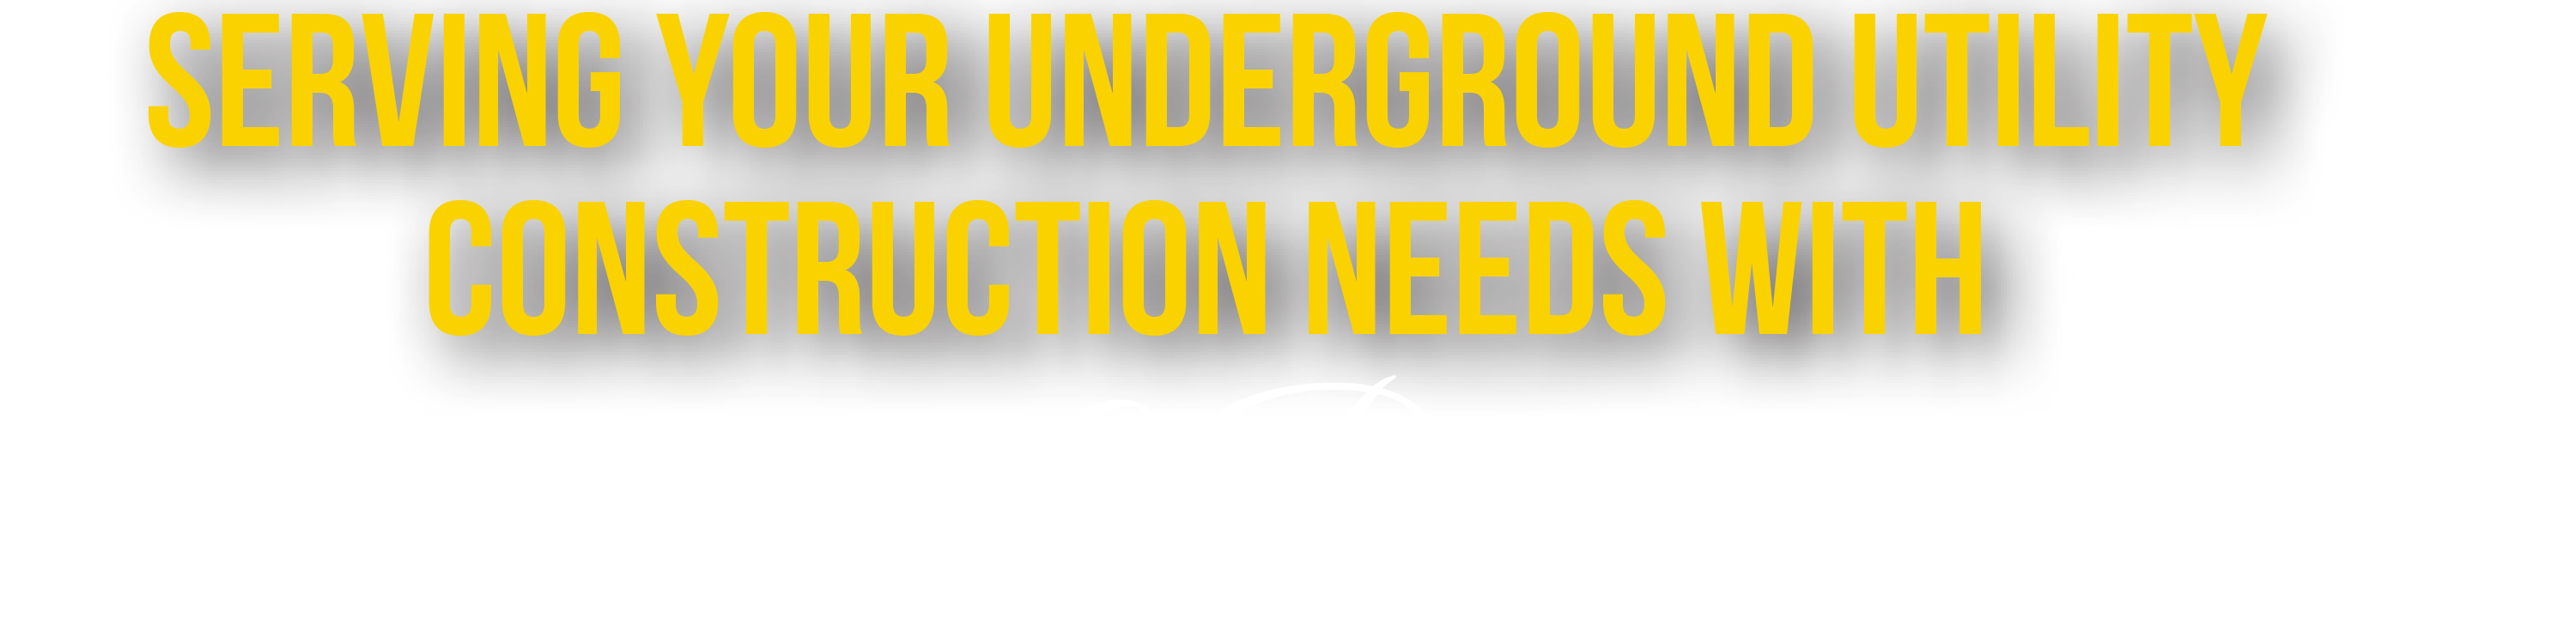 Serving your underground utility construction needs with Excellence and Professionalism 